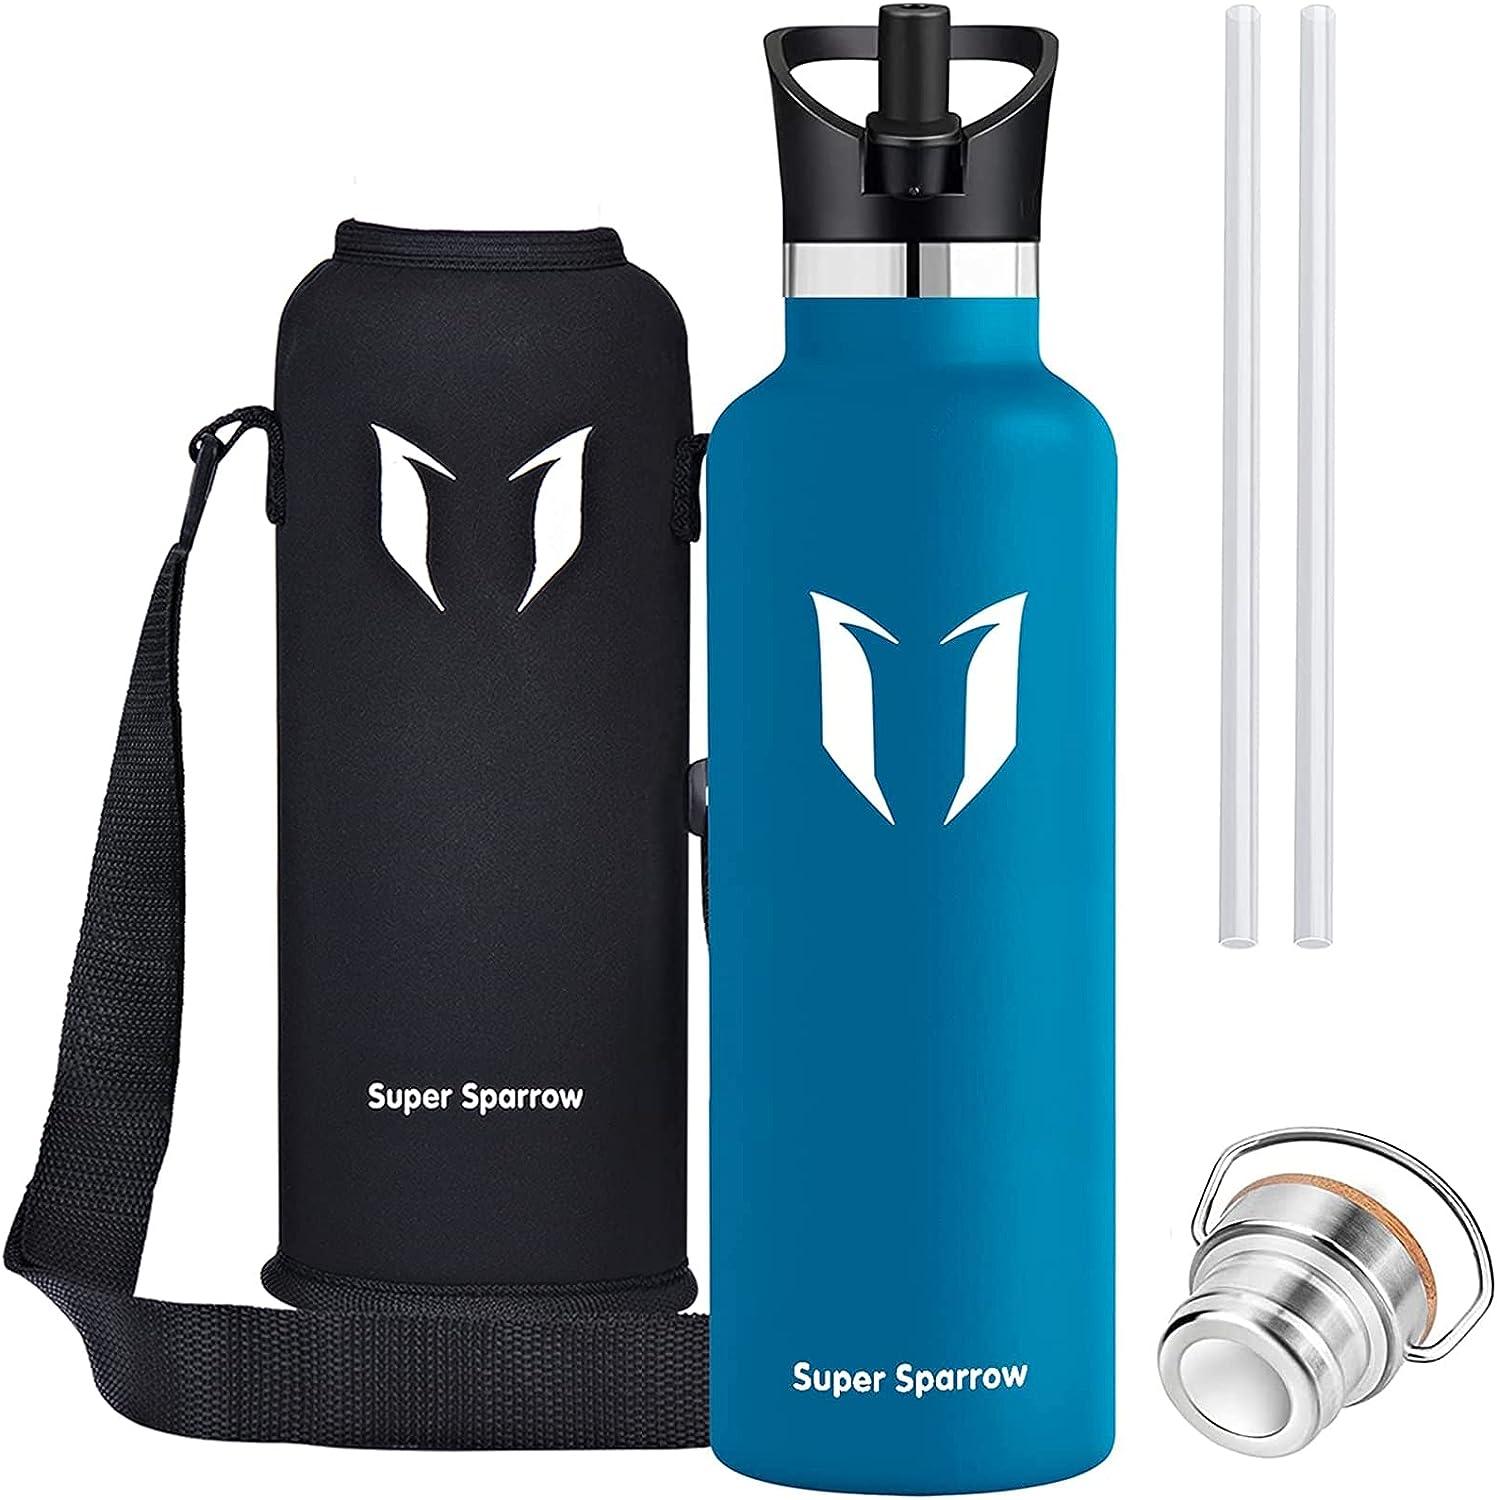 Super Sparrow 1000ML To-Go Stainless Steel Water Bottle, Sea Blue